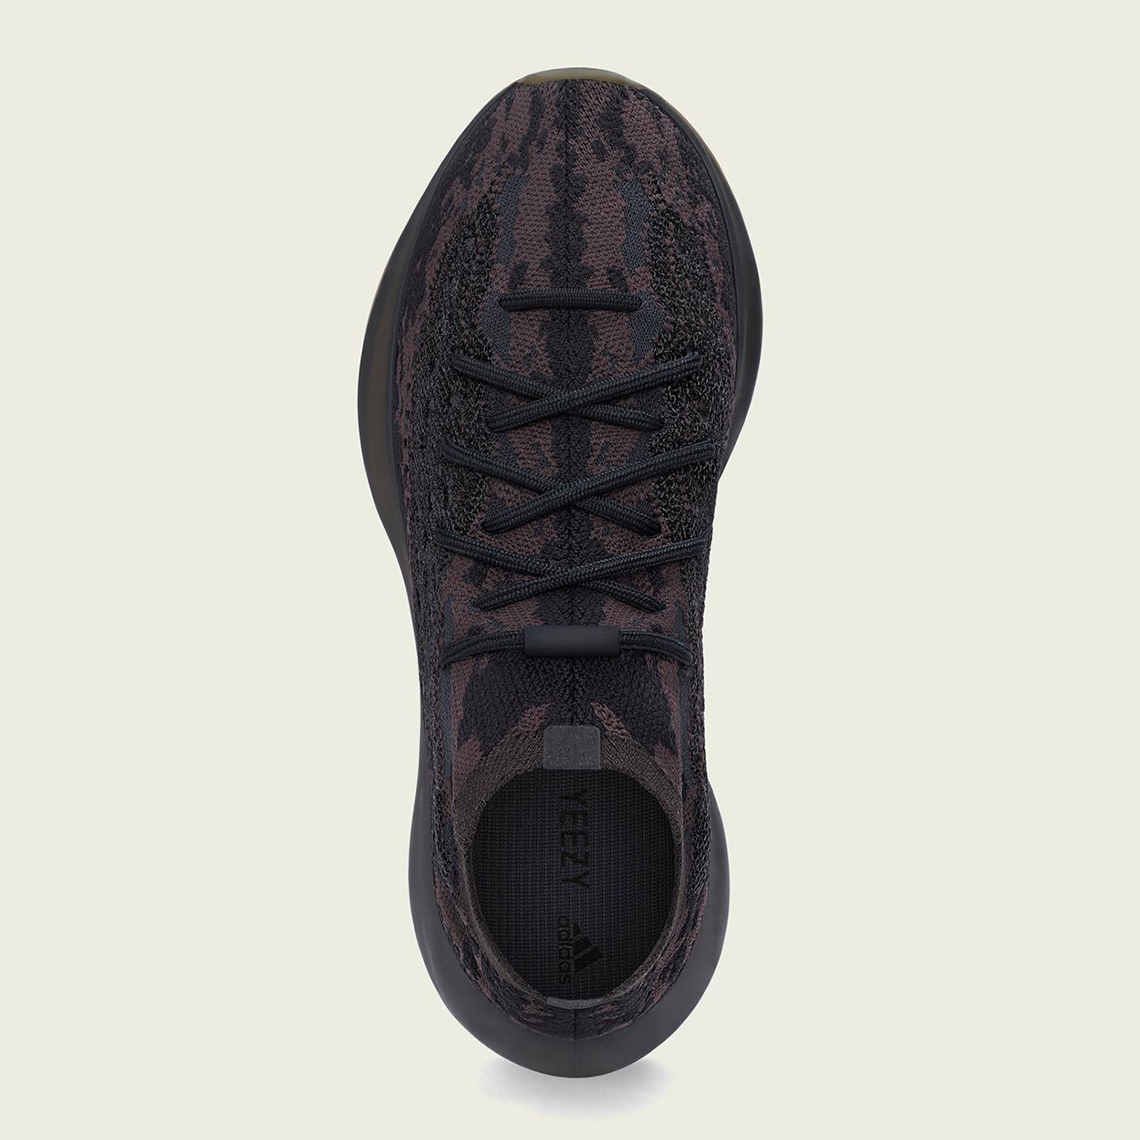 Adidas Yeezy Boost 380 Onyx Fz1270 Official Images 2